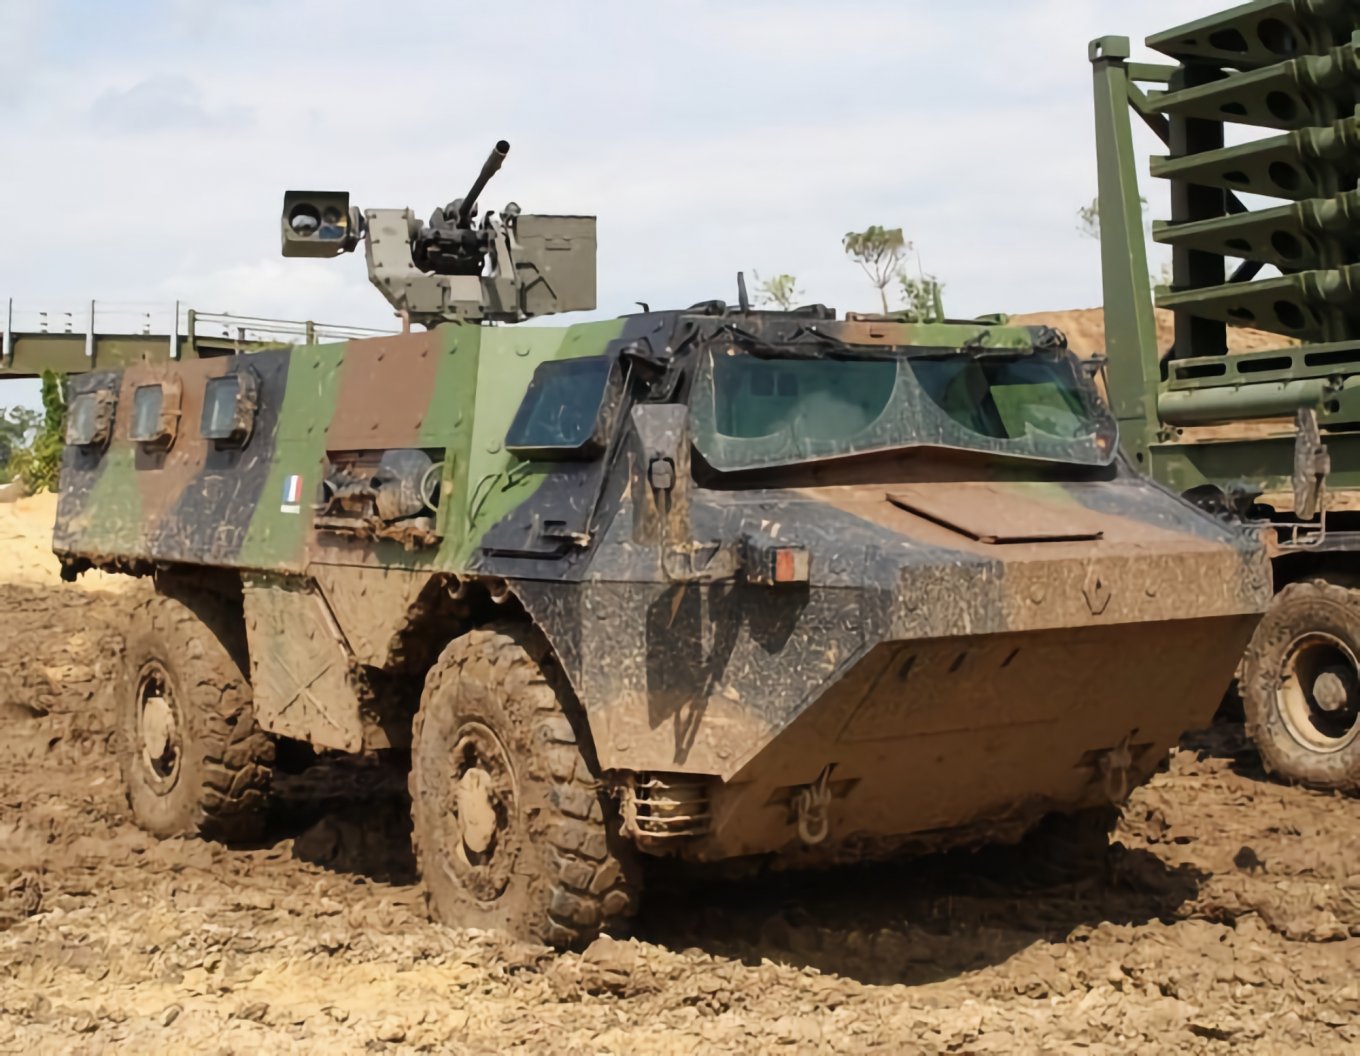 French VAB armored personnel carrier